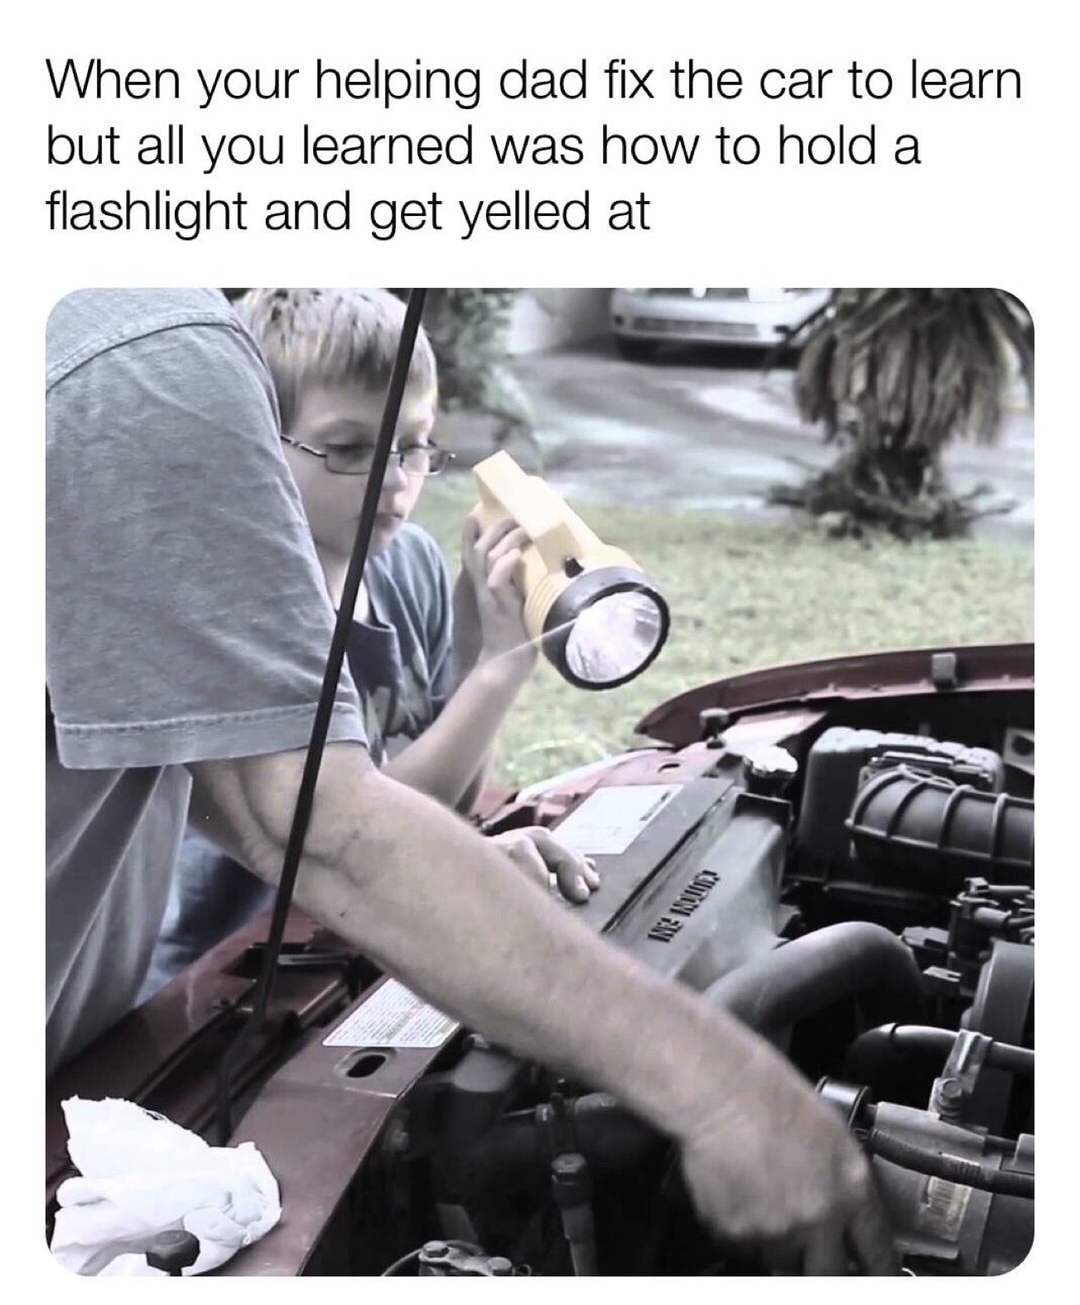 dank meme of your helping dad fix the car - When your helping dad fix the car to learn but all you learned was how to hold a flashlight and get yelled at